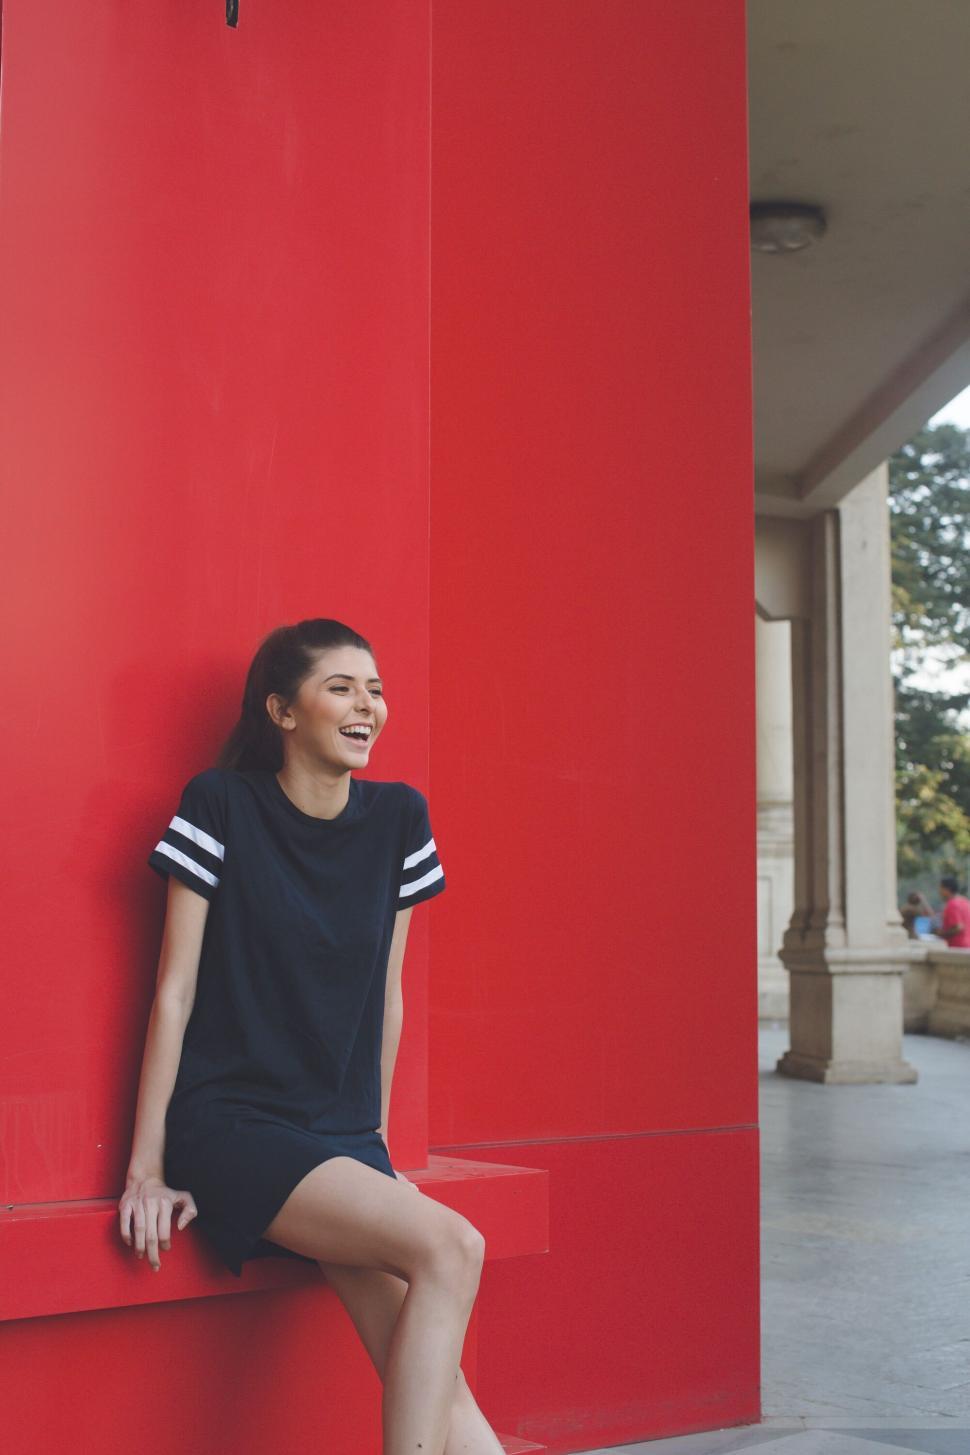 Free Image of Woman sitting and laughing in red alcove 